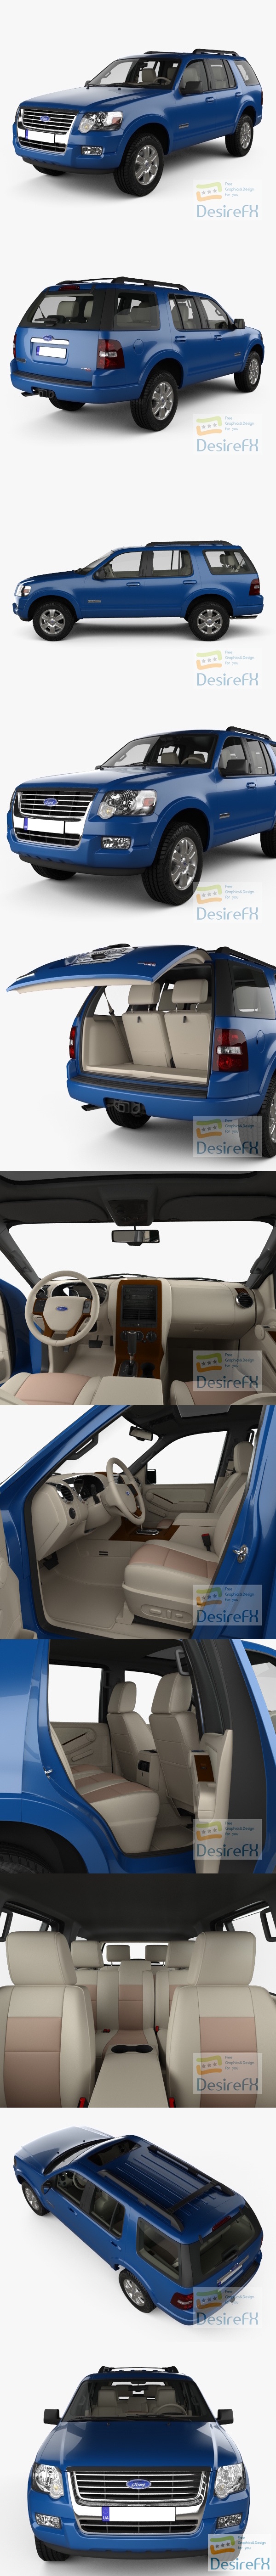 Ford Explorer with HQ interior 2006 3D Model